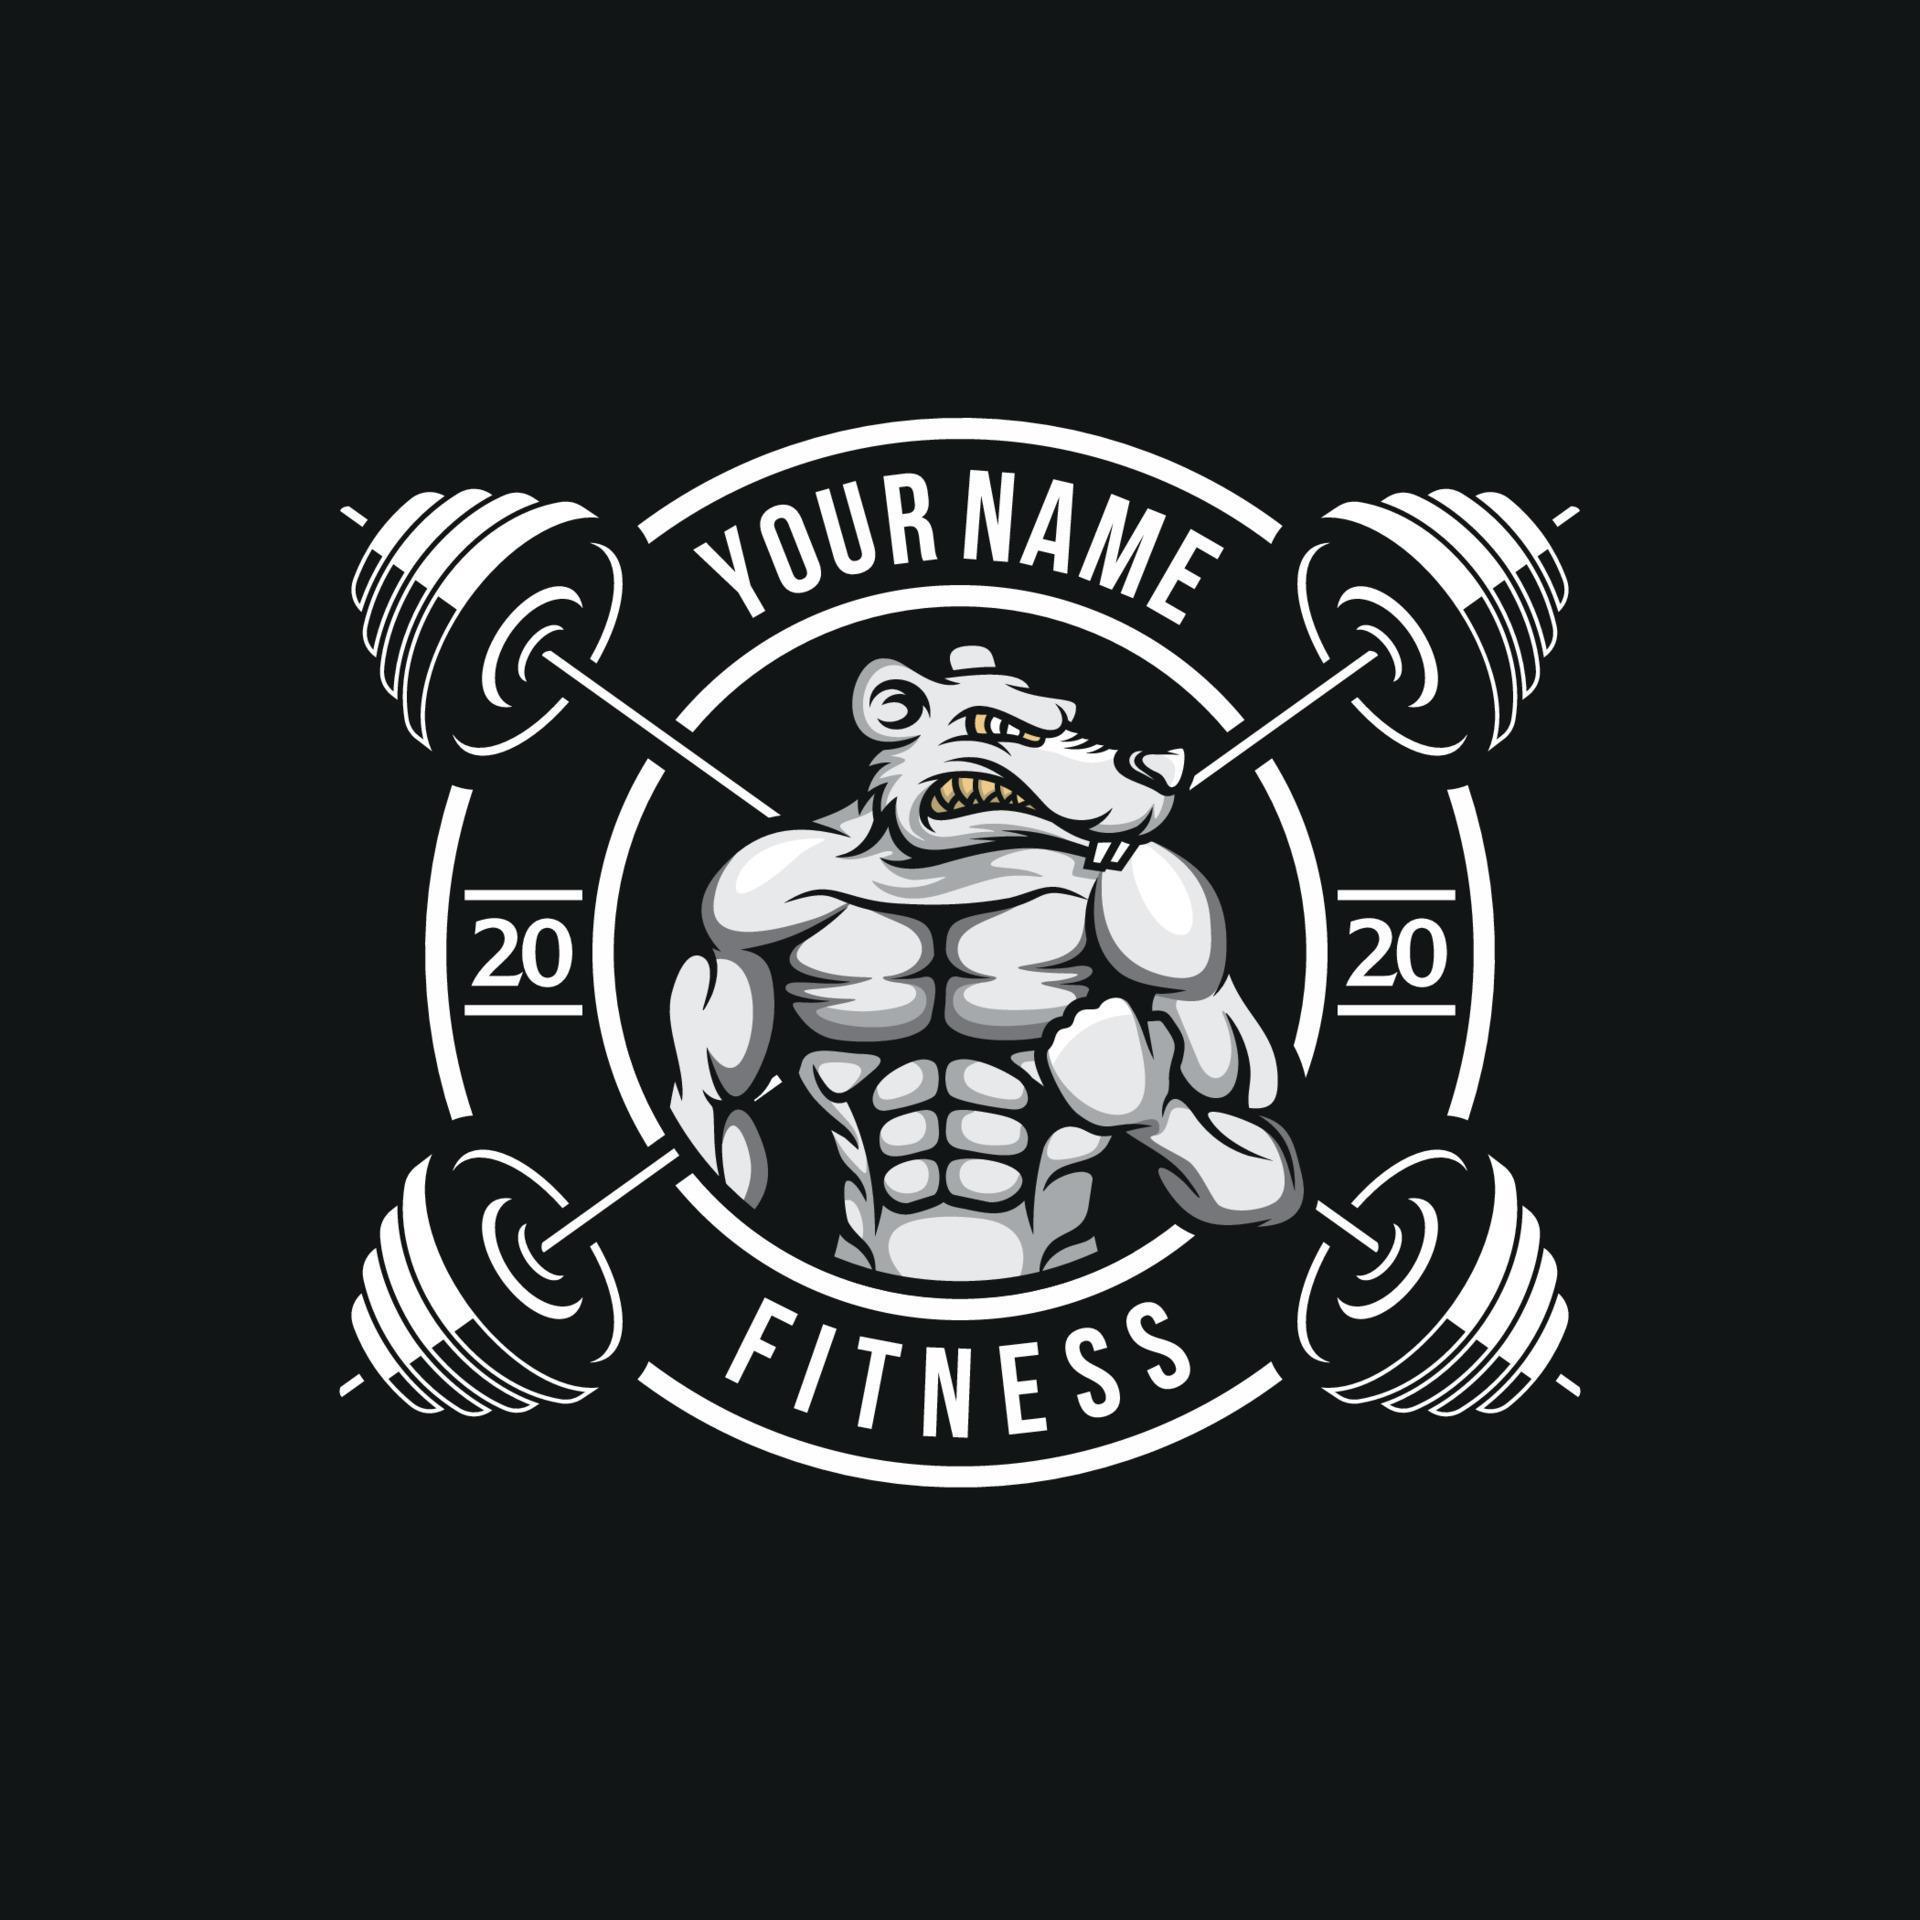 Fitness Badge Logo With Barbell And Black And White Color 6207651